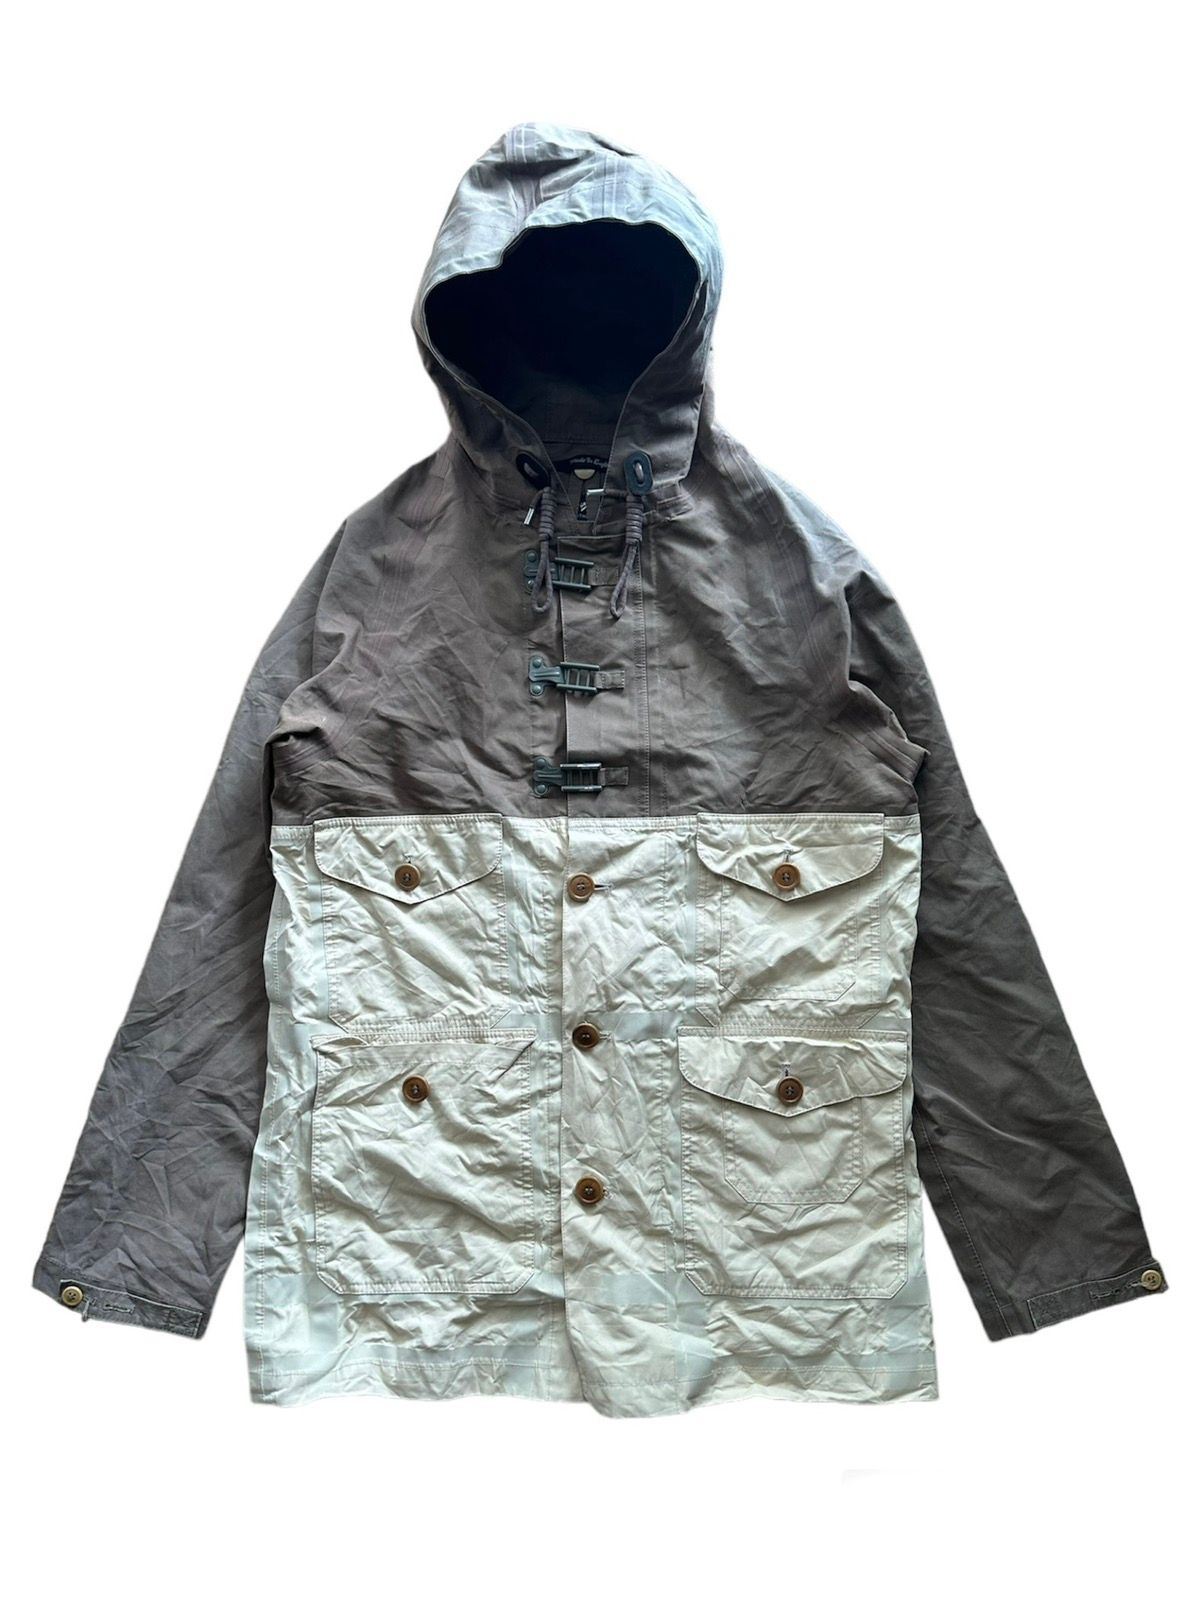 Nigel Cabourn Camera Man Ventile Limited Edition Down Jacket - 1